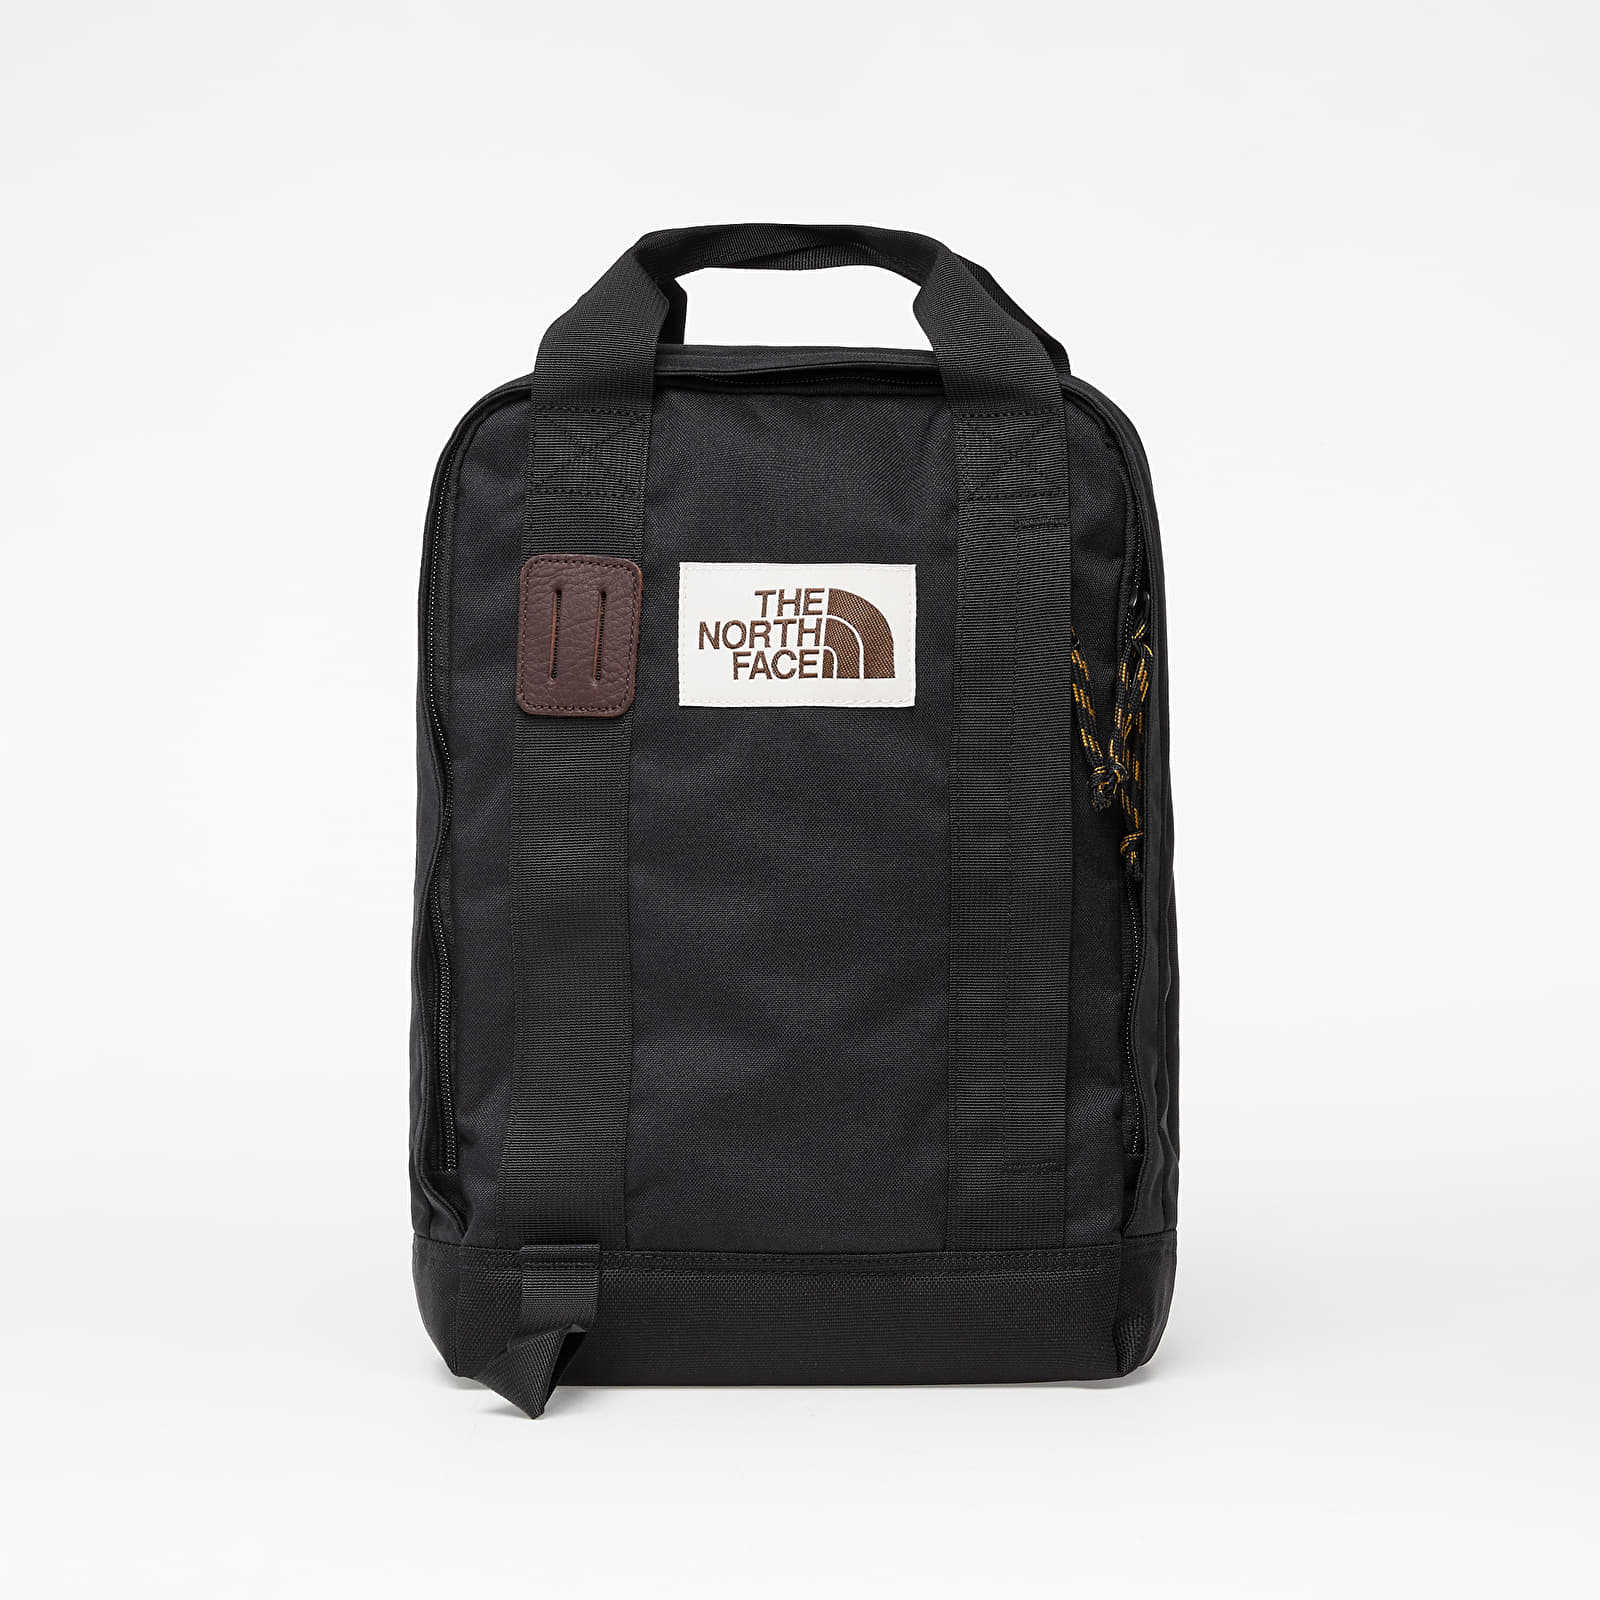 Backpacks The North Face Tote Pack Tnf Black Heather